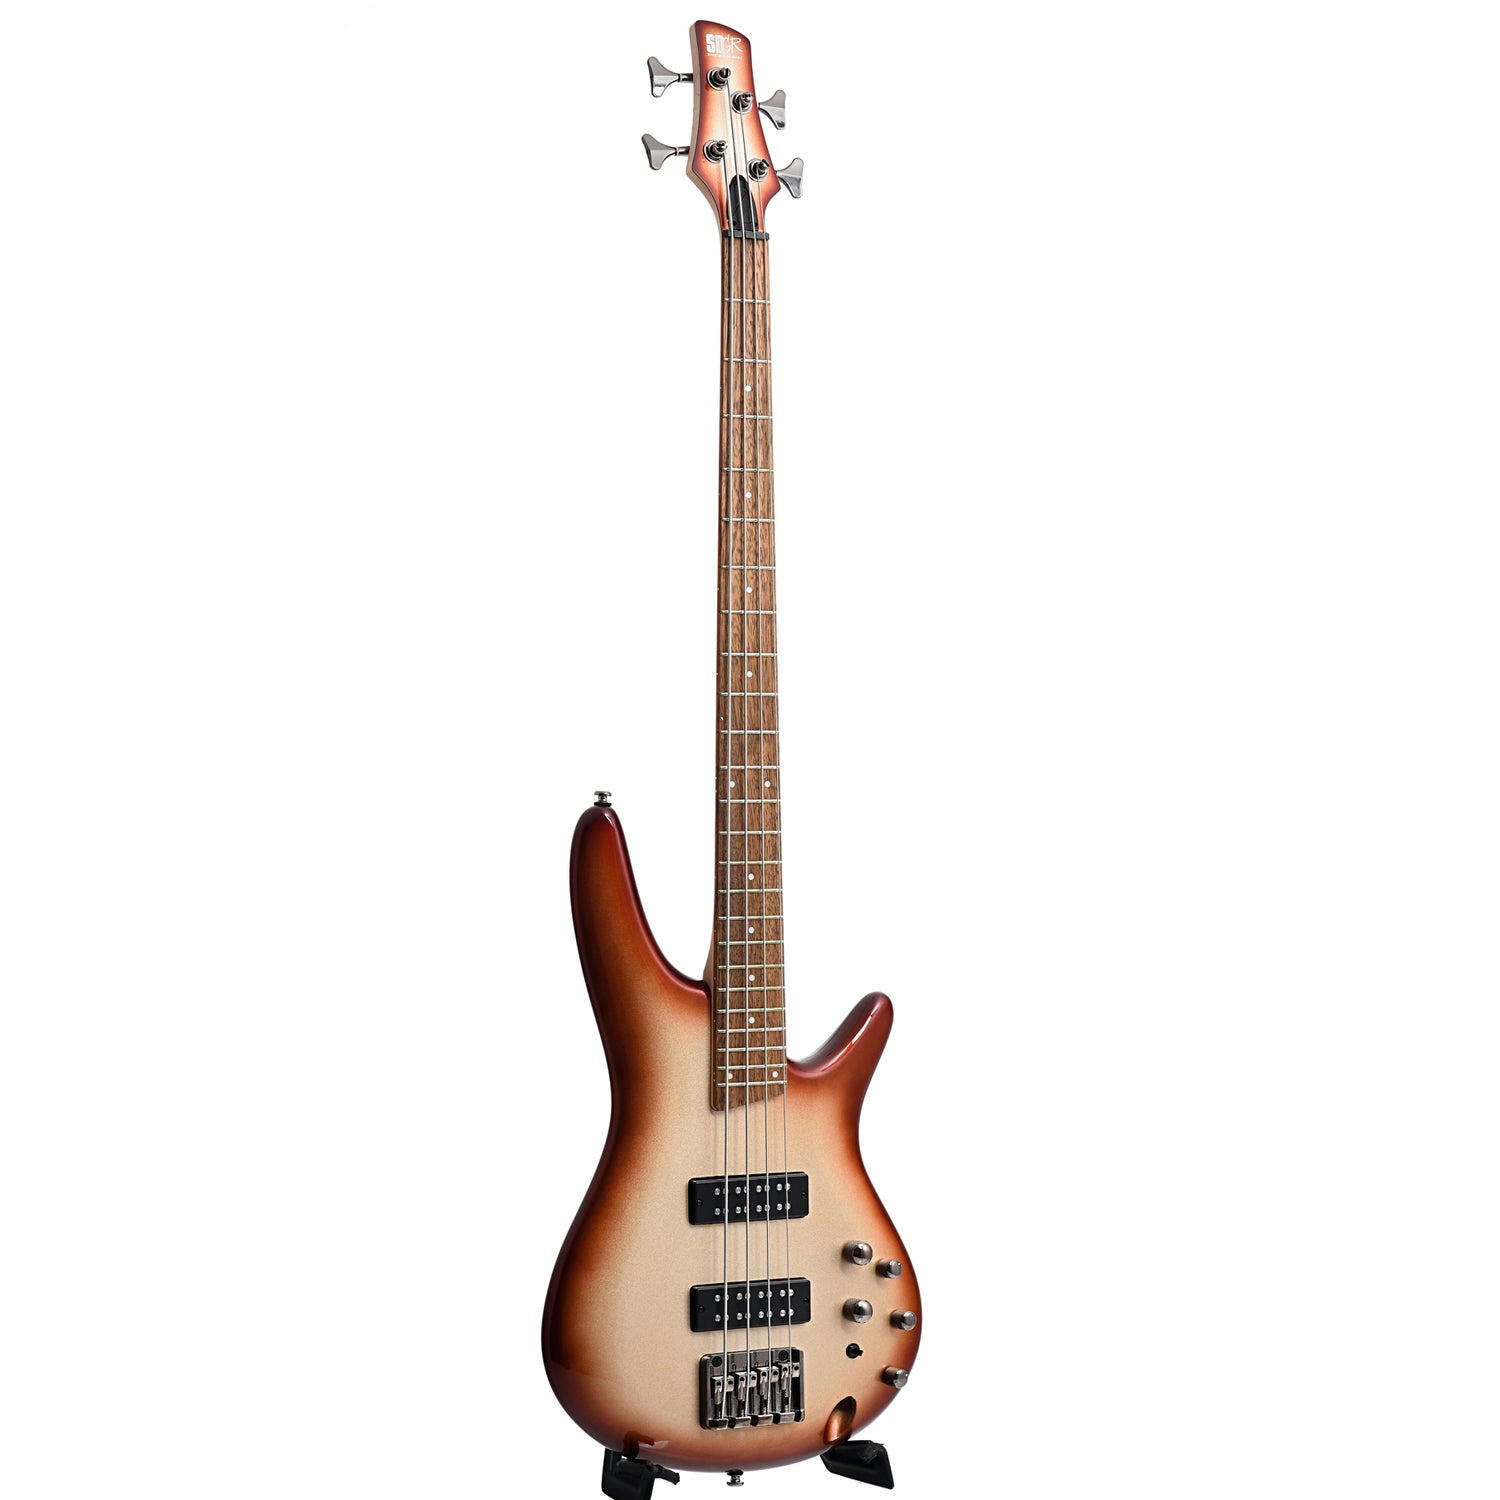 Image 11 of Ibanez SR300E 4-String Bass, Charred Champagne Burst - SKU# SR300E-CCB : Product Type Solid Body Bass Guitars : Elderly Instruments